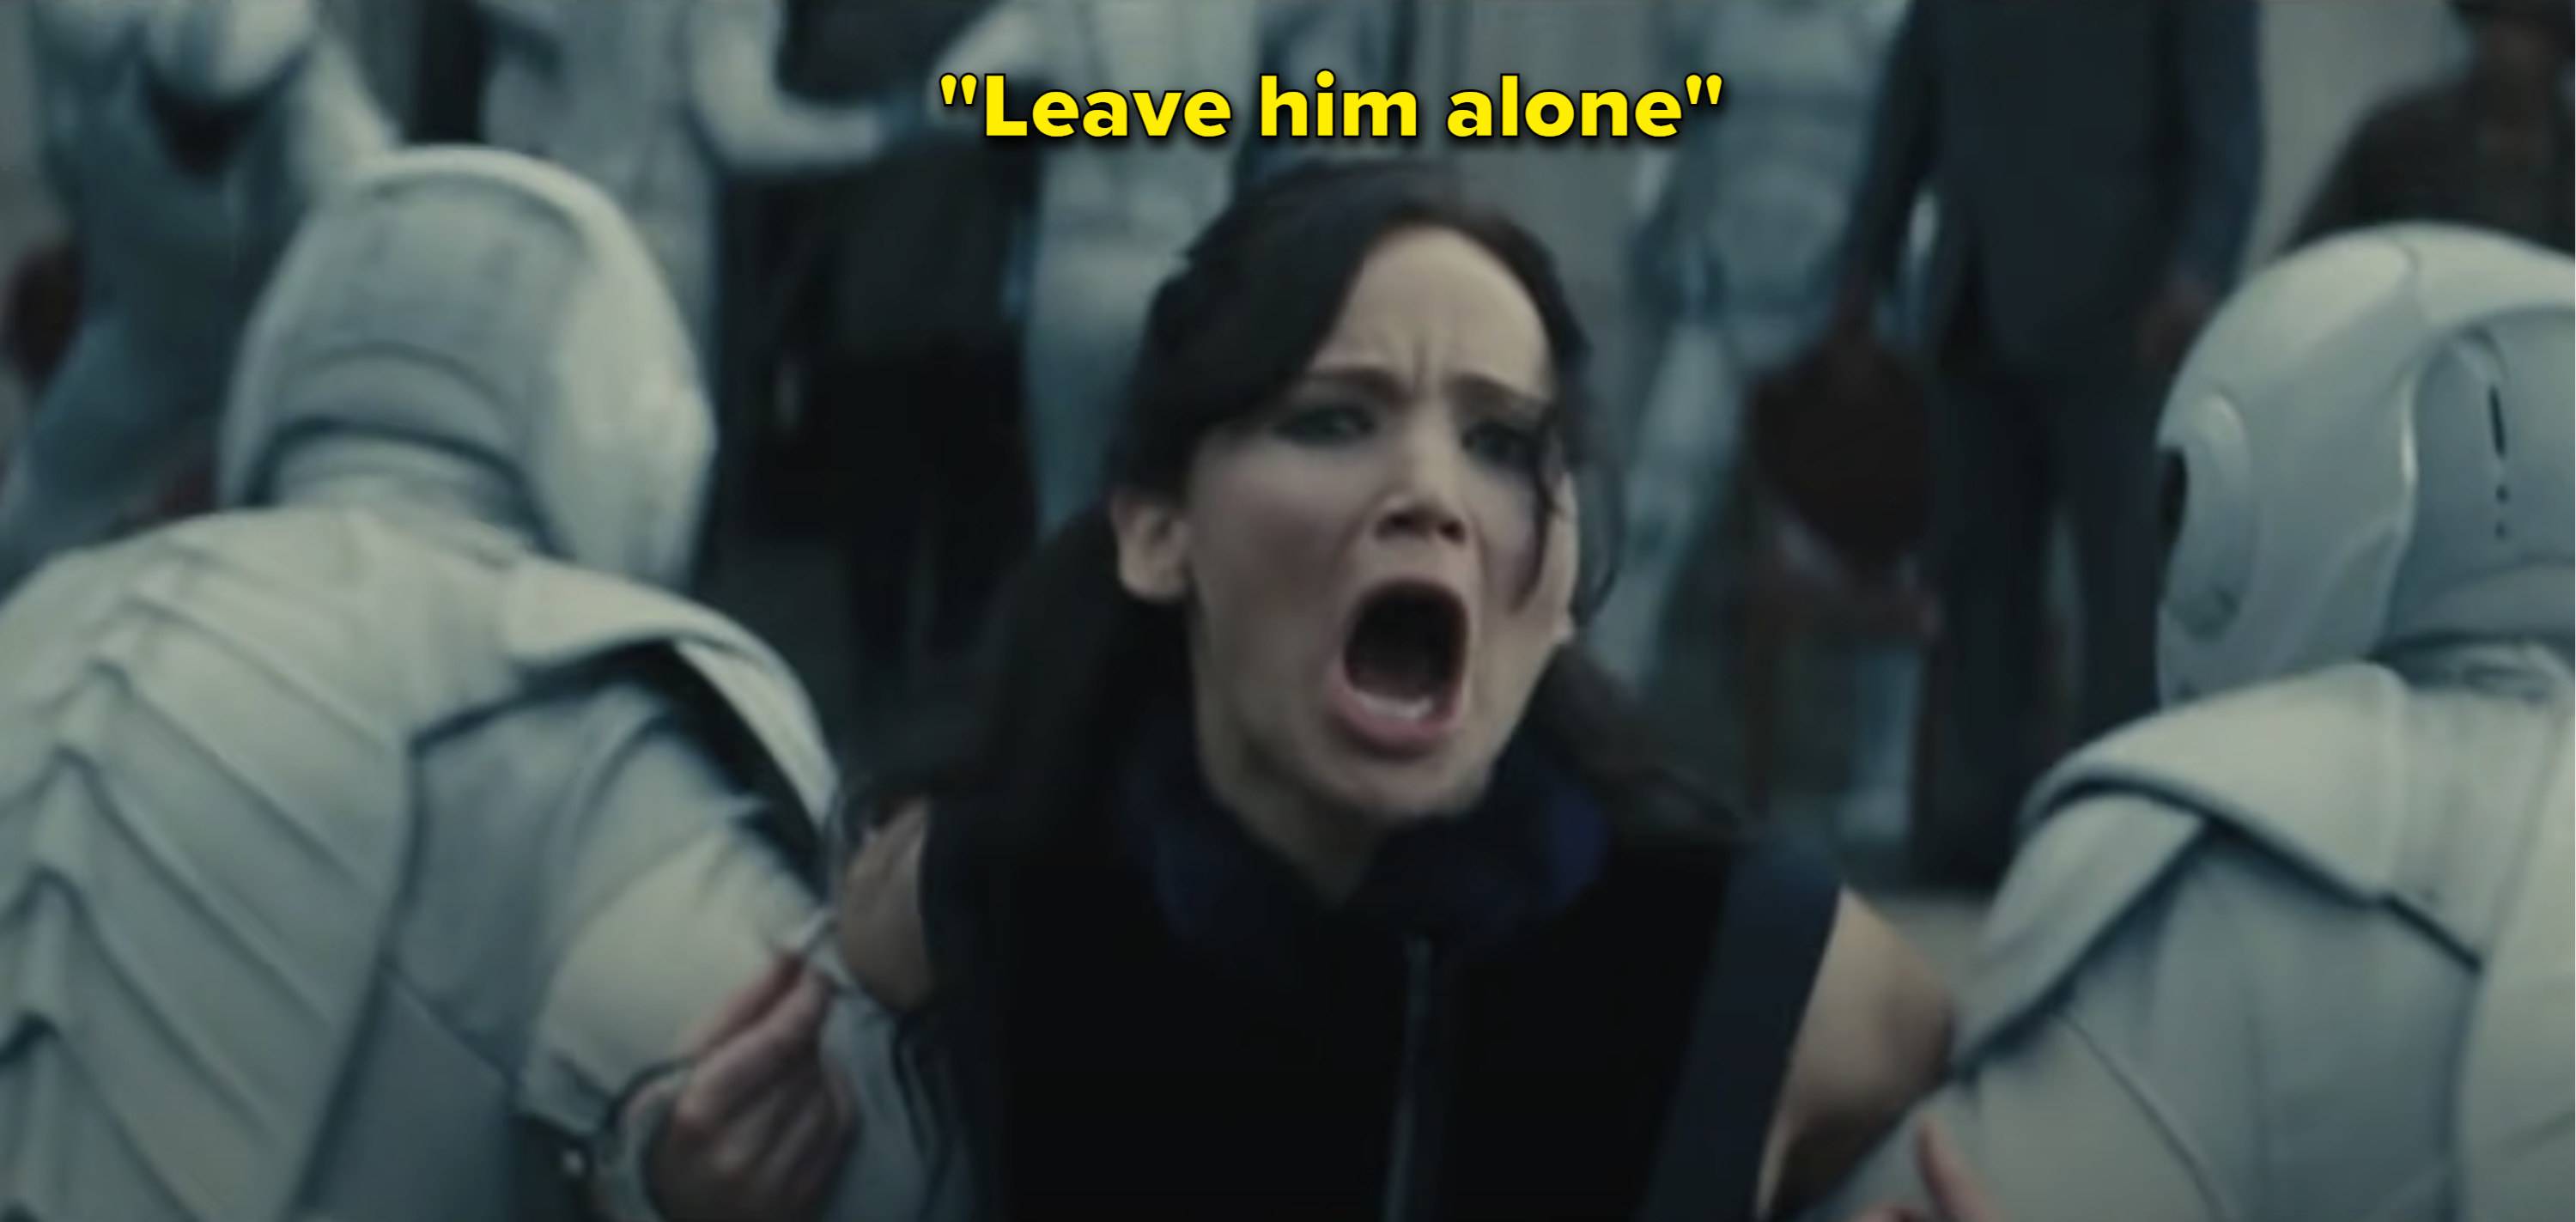 Katniss from &quot;The Hunger Games: Catching Fire&quot; movie screaming while being dragged away by guards with the caption &quot;Leave him alone&quot;